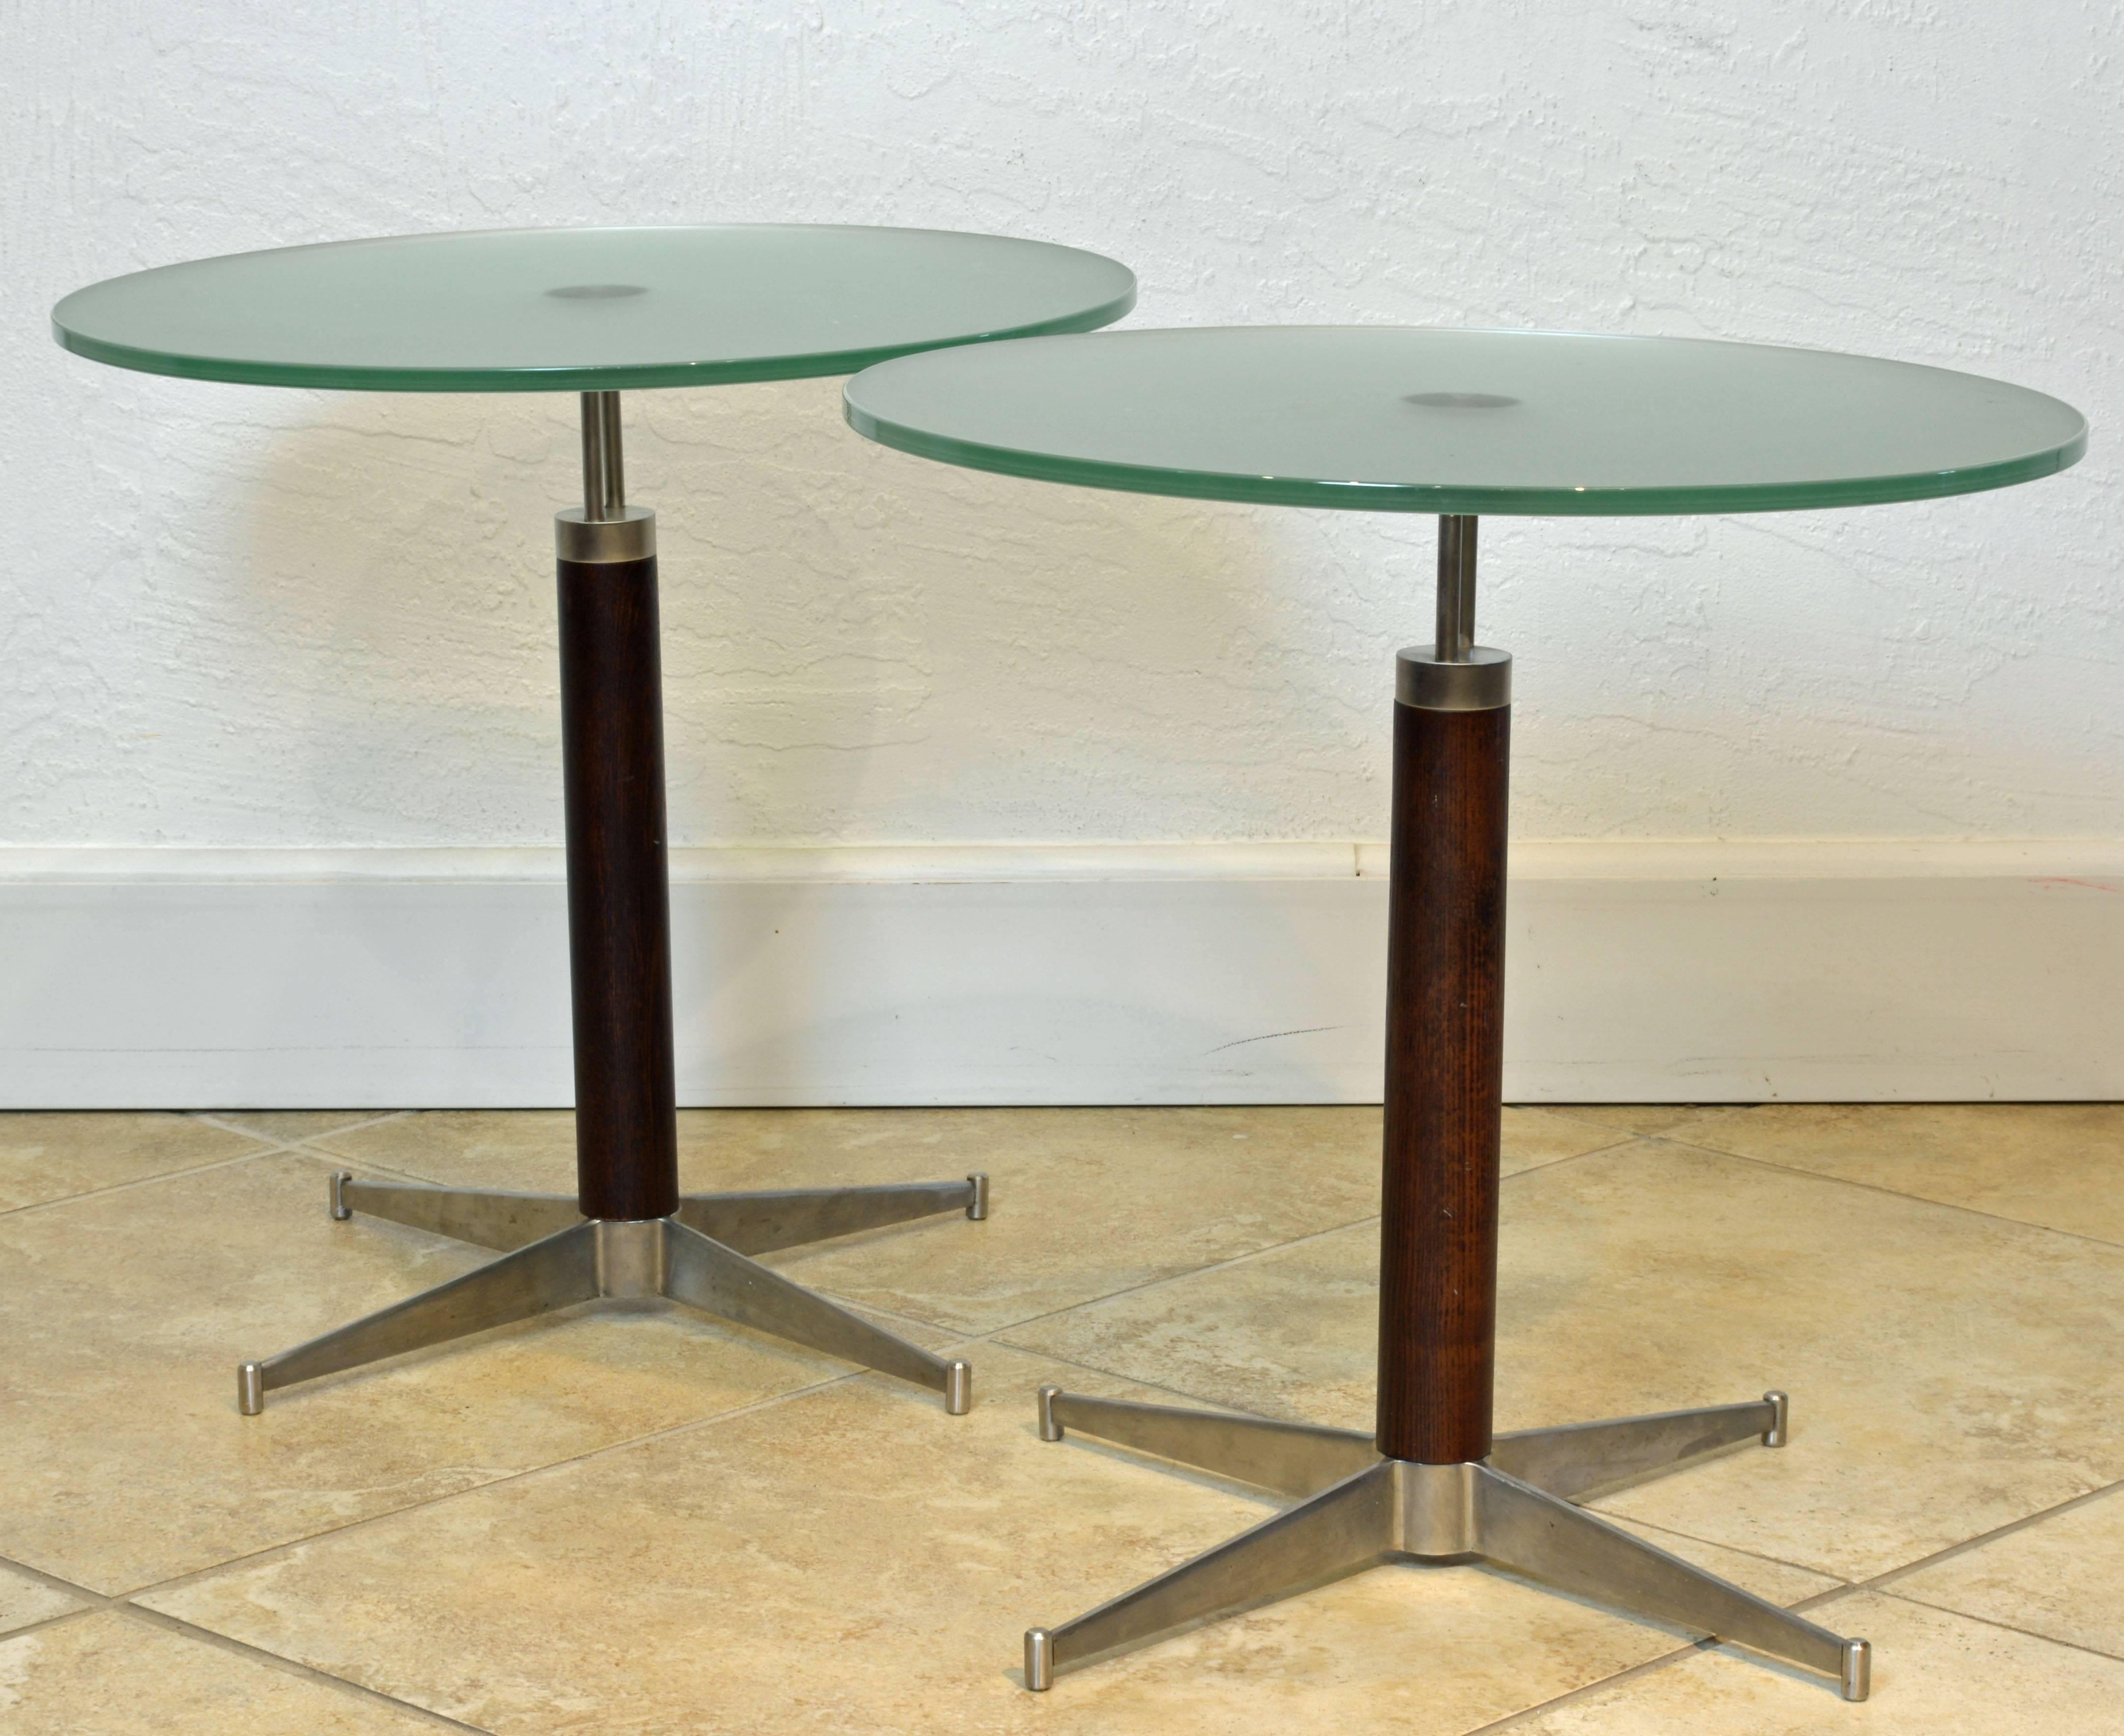 These tables of impeccable craftsmanship and materials feature the modern Minimalist design typical of Arne Jacobsen and other Mid-Century designers. The frosted glass tops lend a special updated quality to the look.